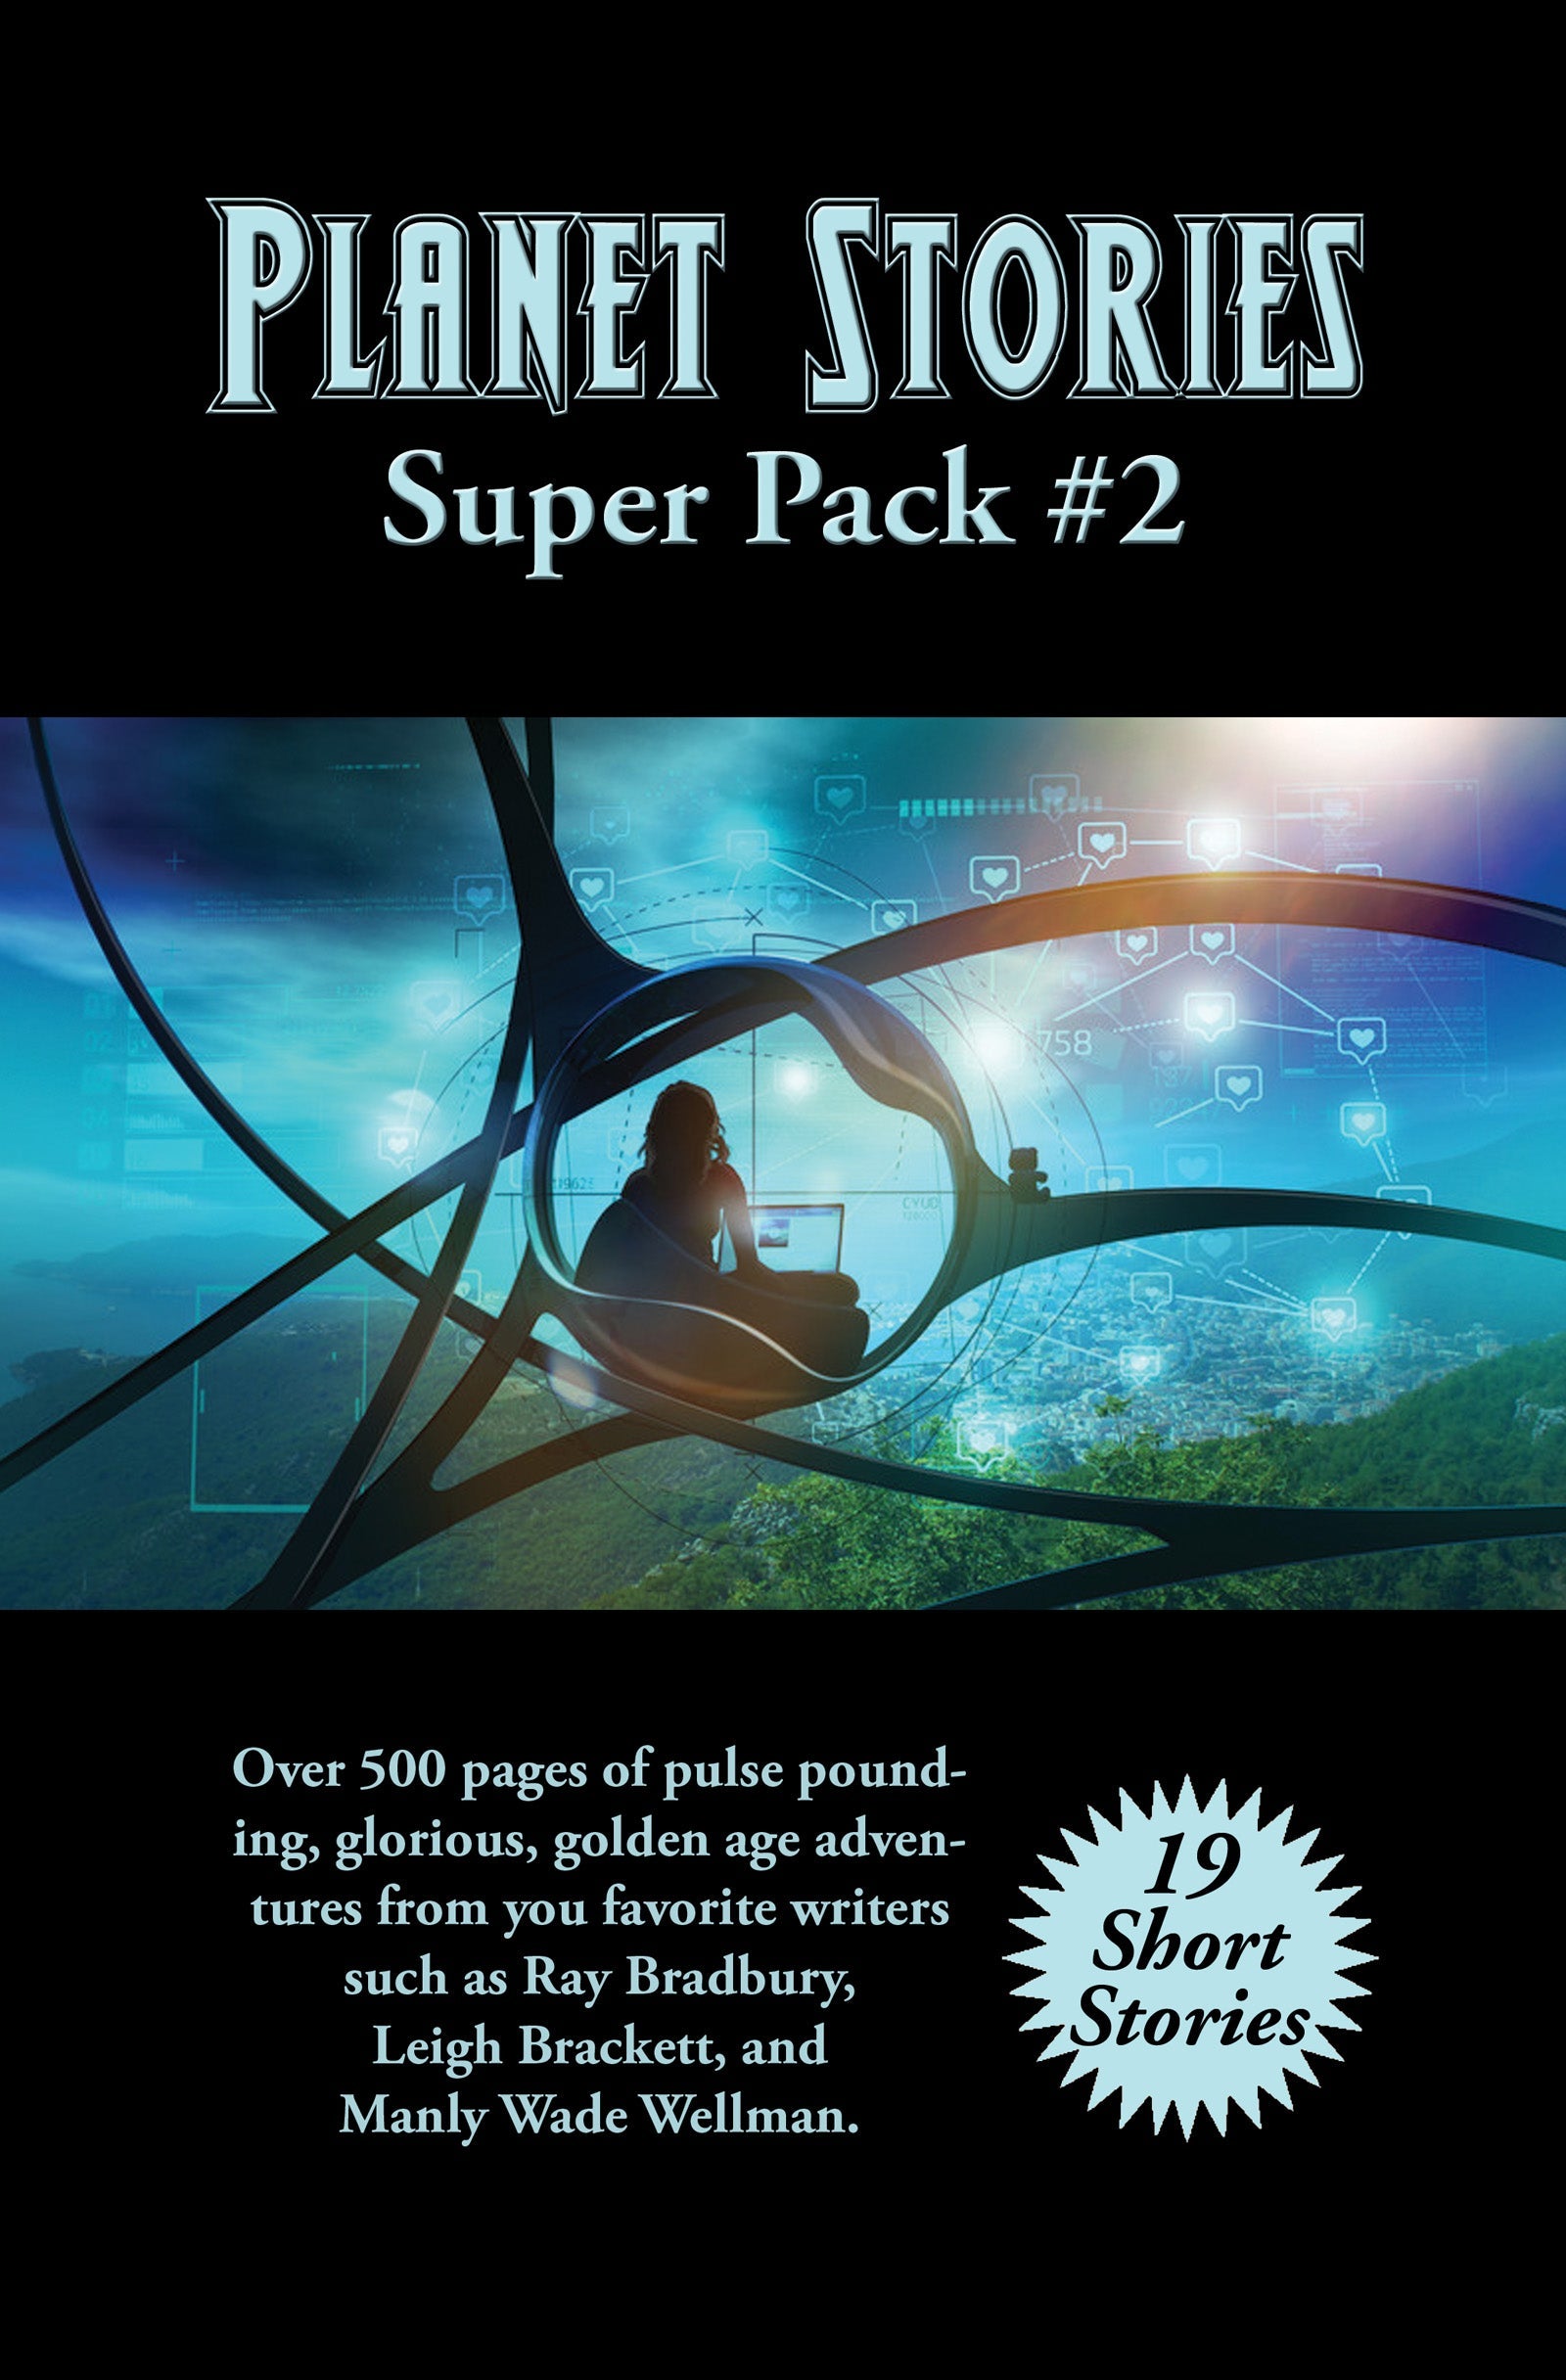 Cover art for Positronic Super Pack #46, the second Planet Stories Super Pack.